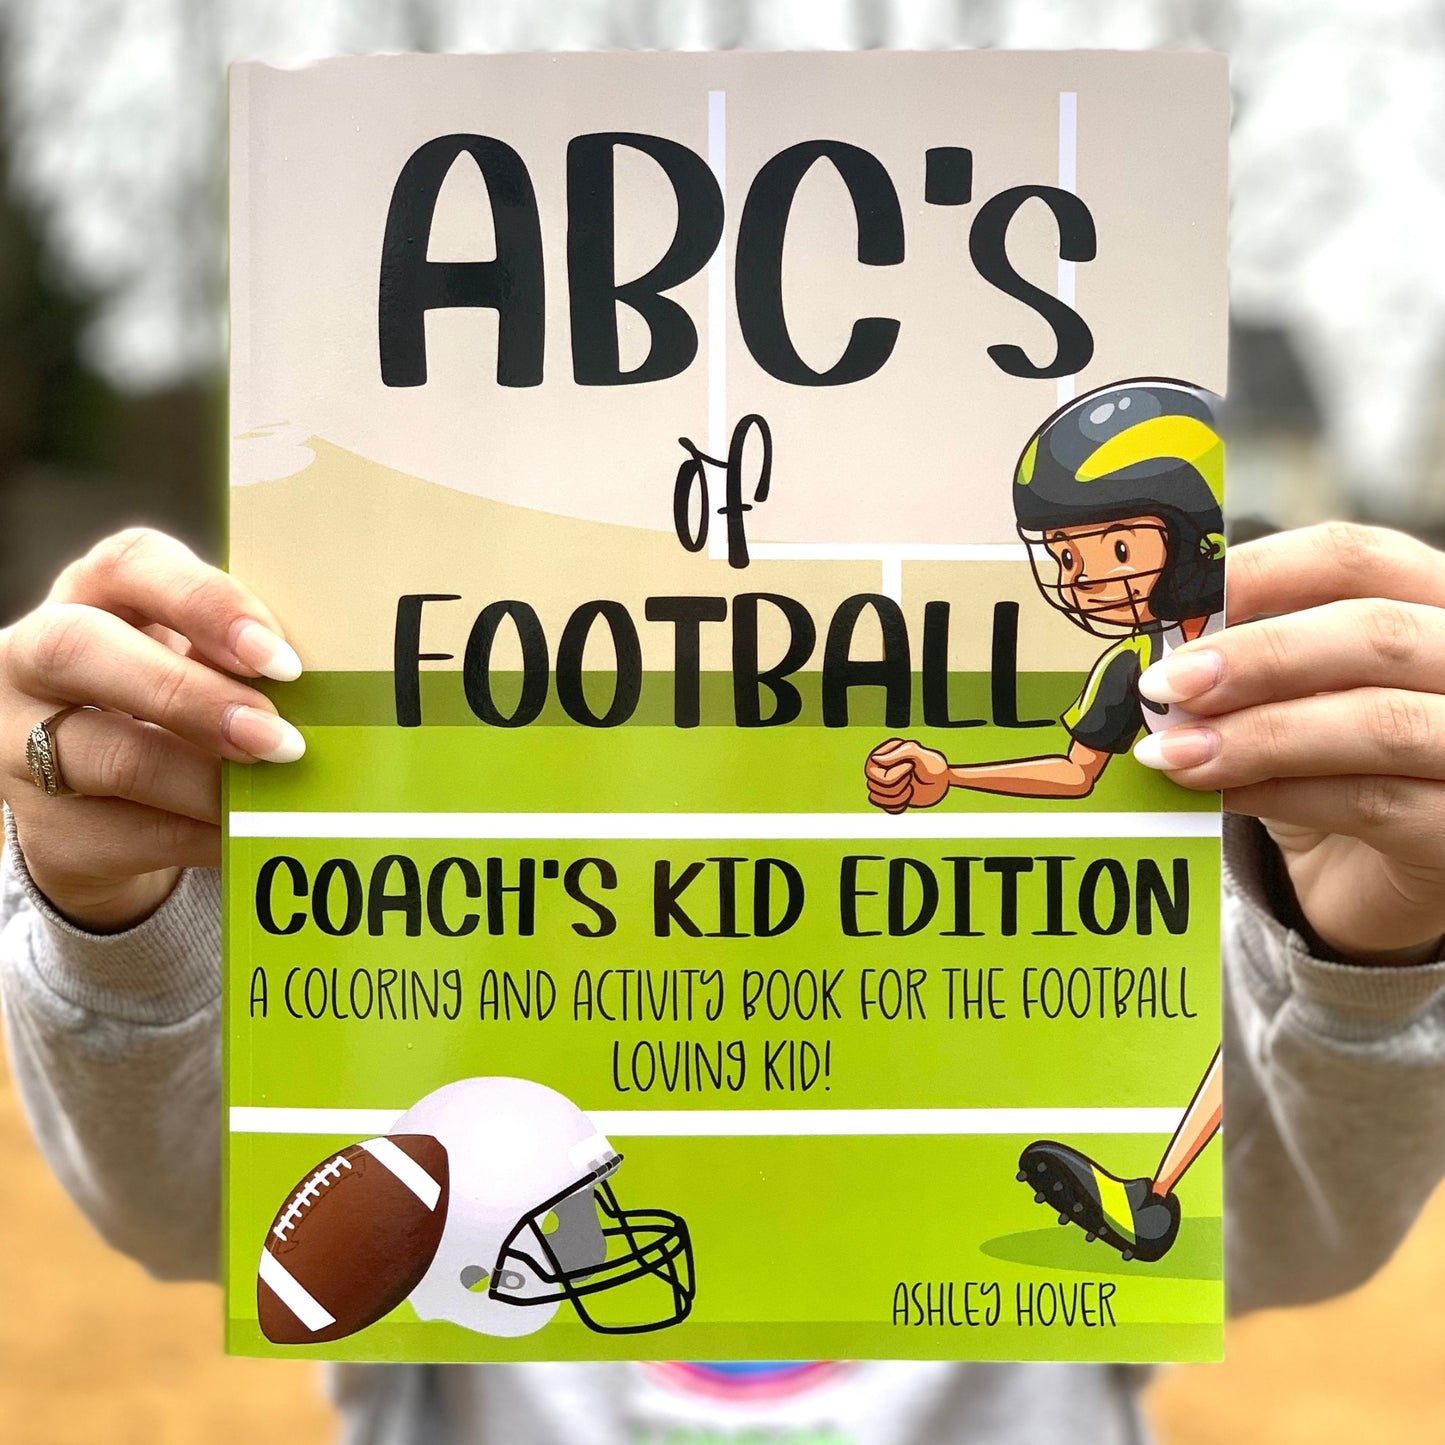 ABC's of Football: Coach's Kid Edition: A Coloring and Activity Book for the Coach's Kid